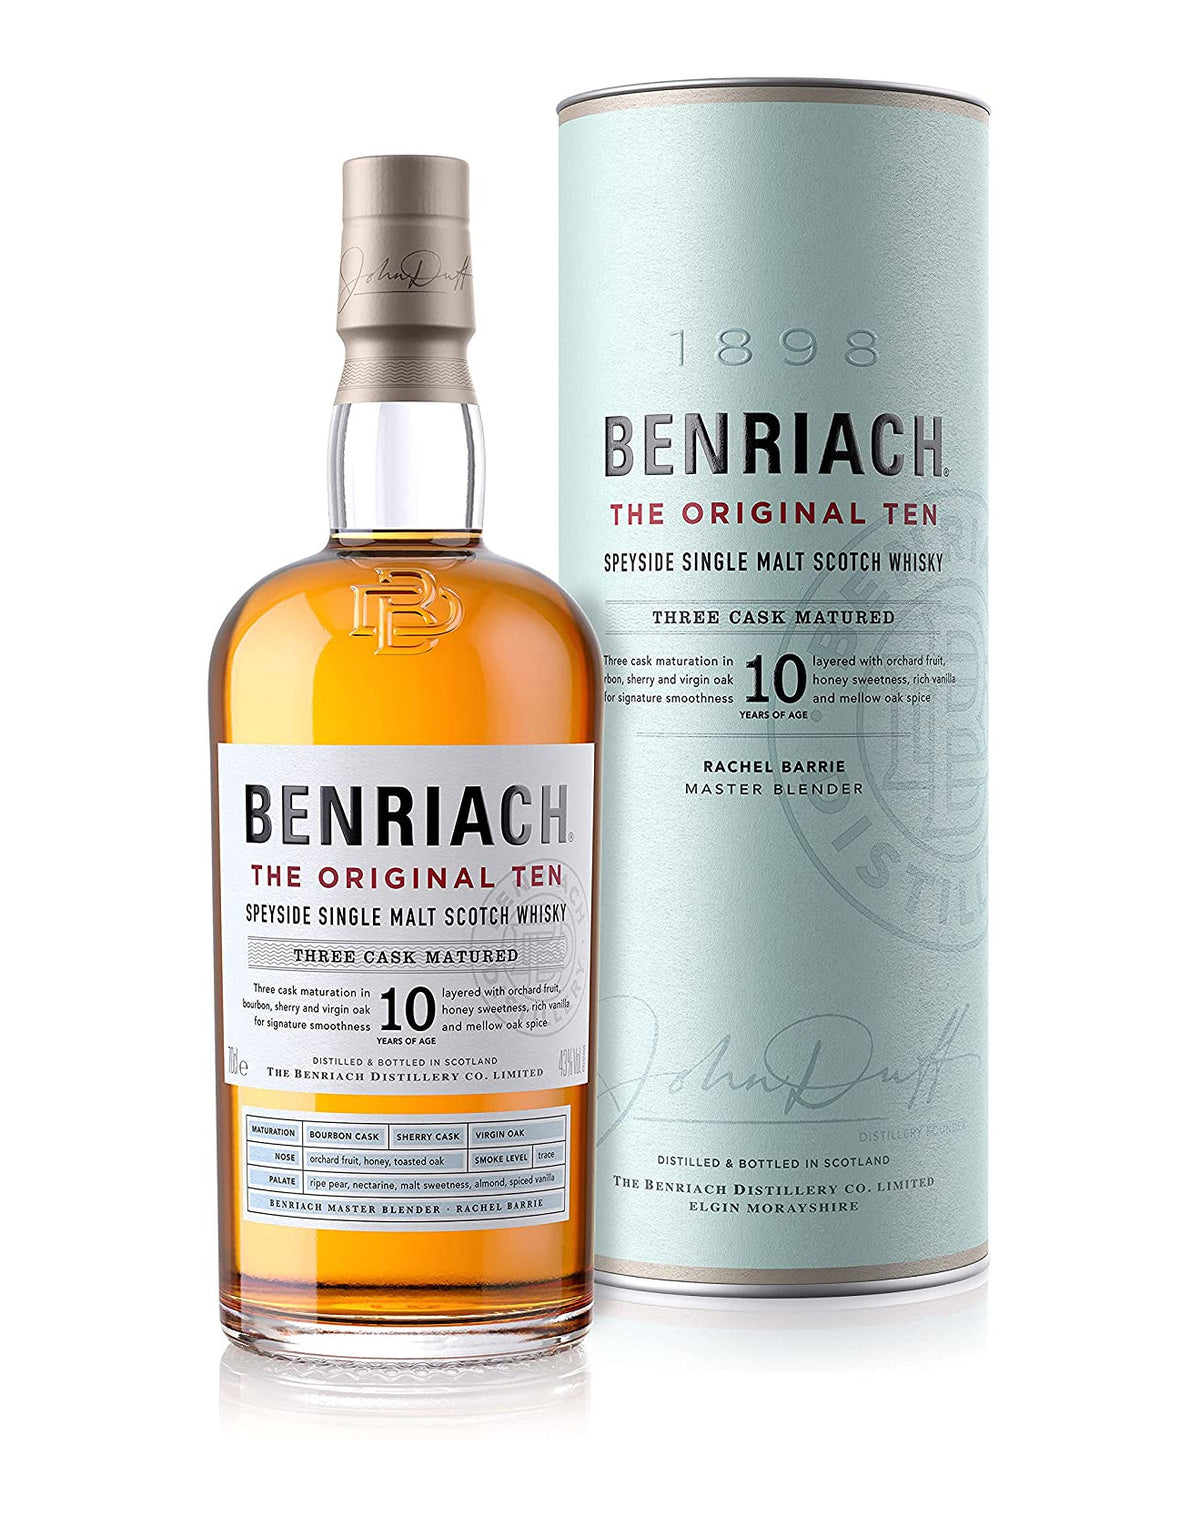 Benriach "The Original 10" 10 Year Old, Single Malt Whisky, 70cl